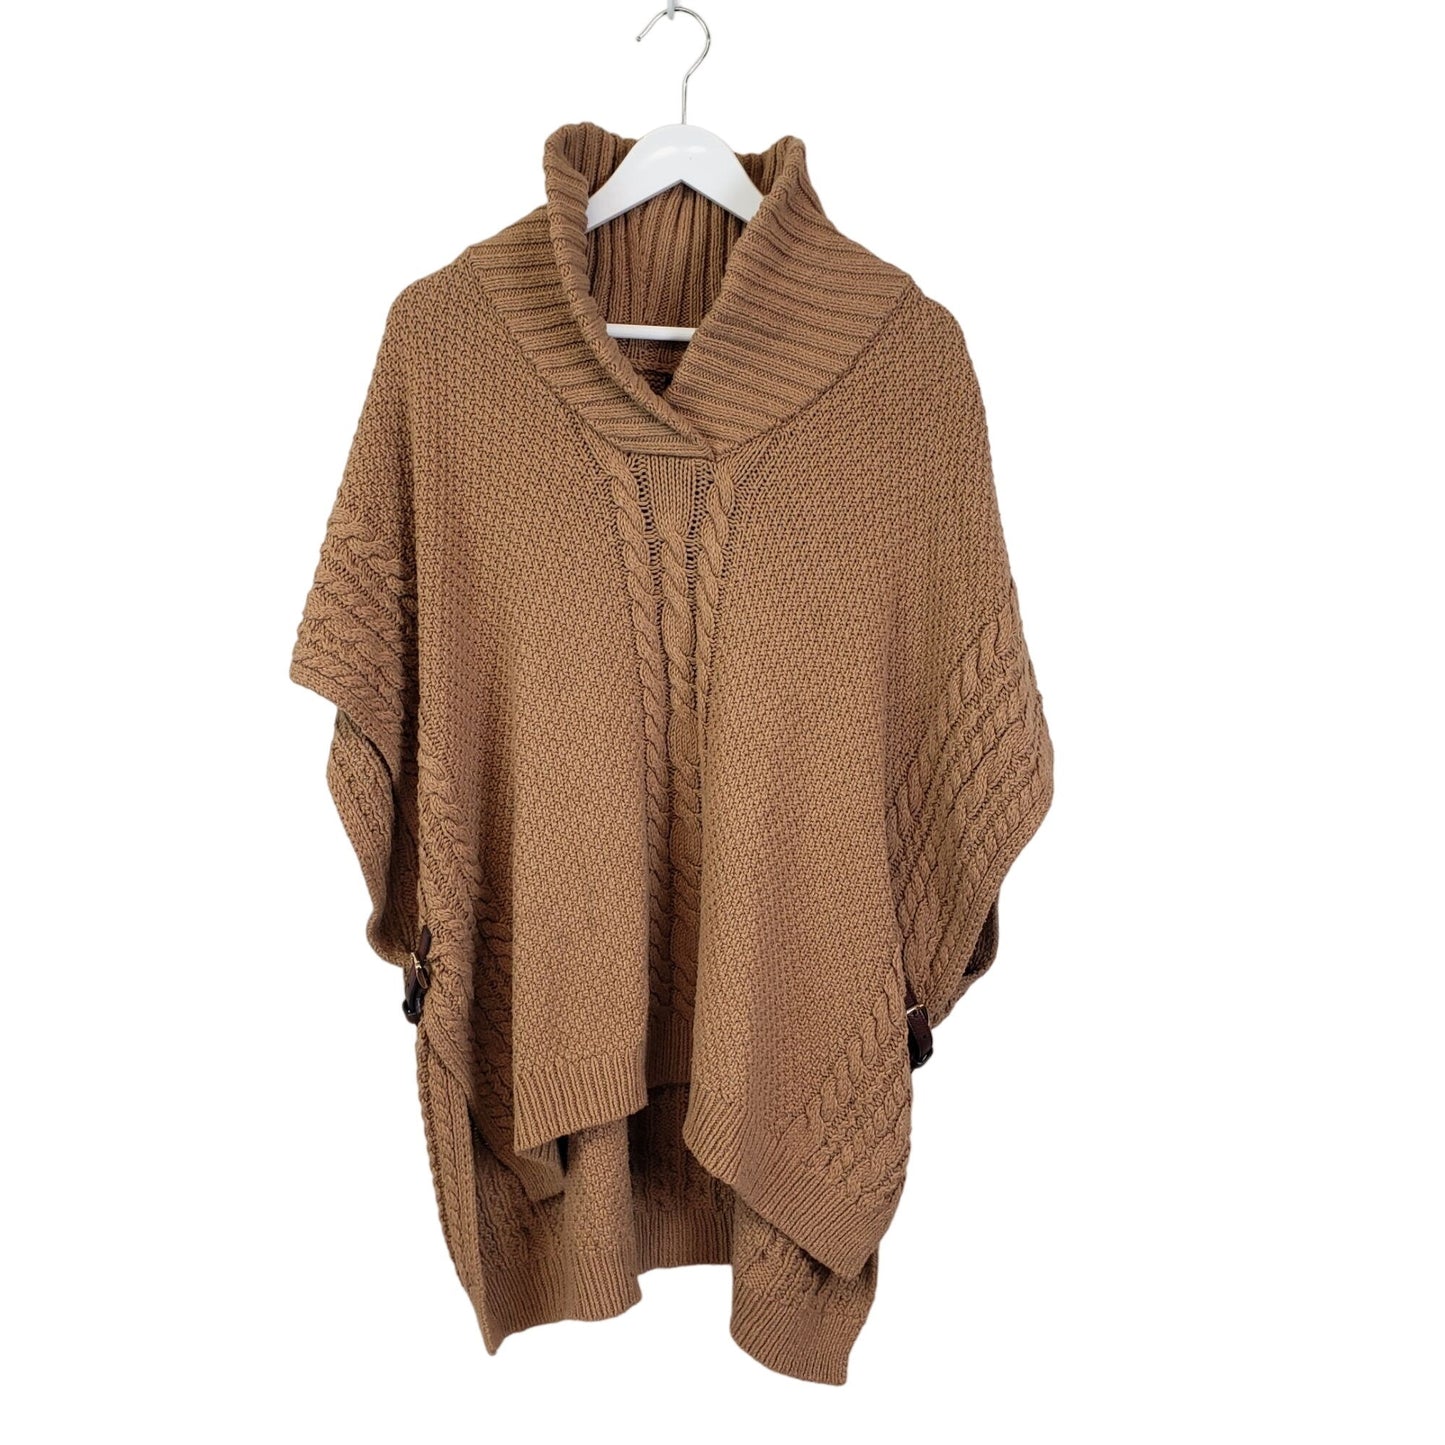 Talbots Oversized Wool Blend Cable Knit Poncho Sweater Size S/M